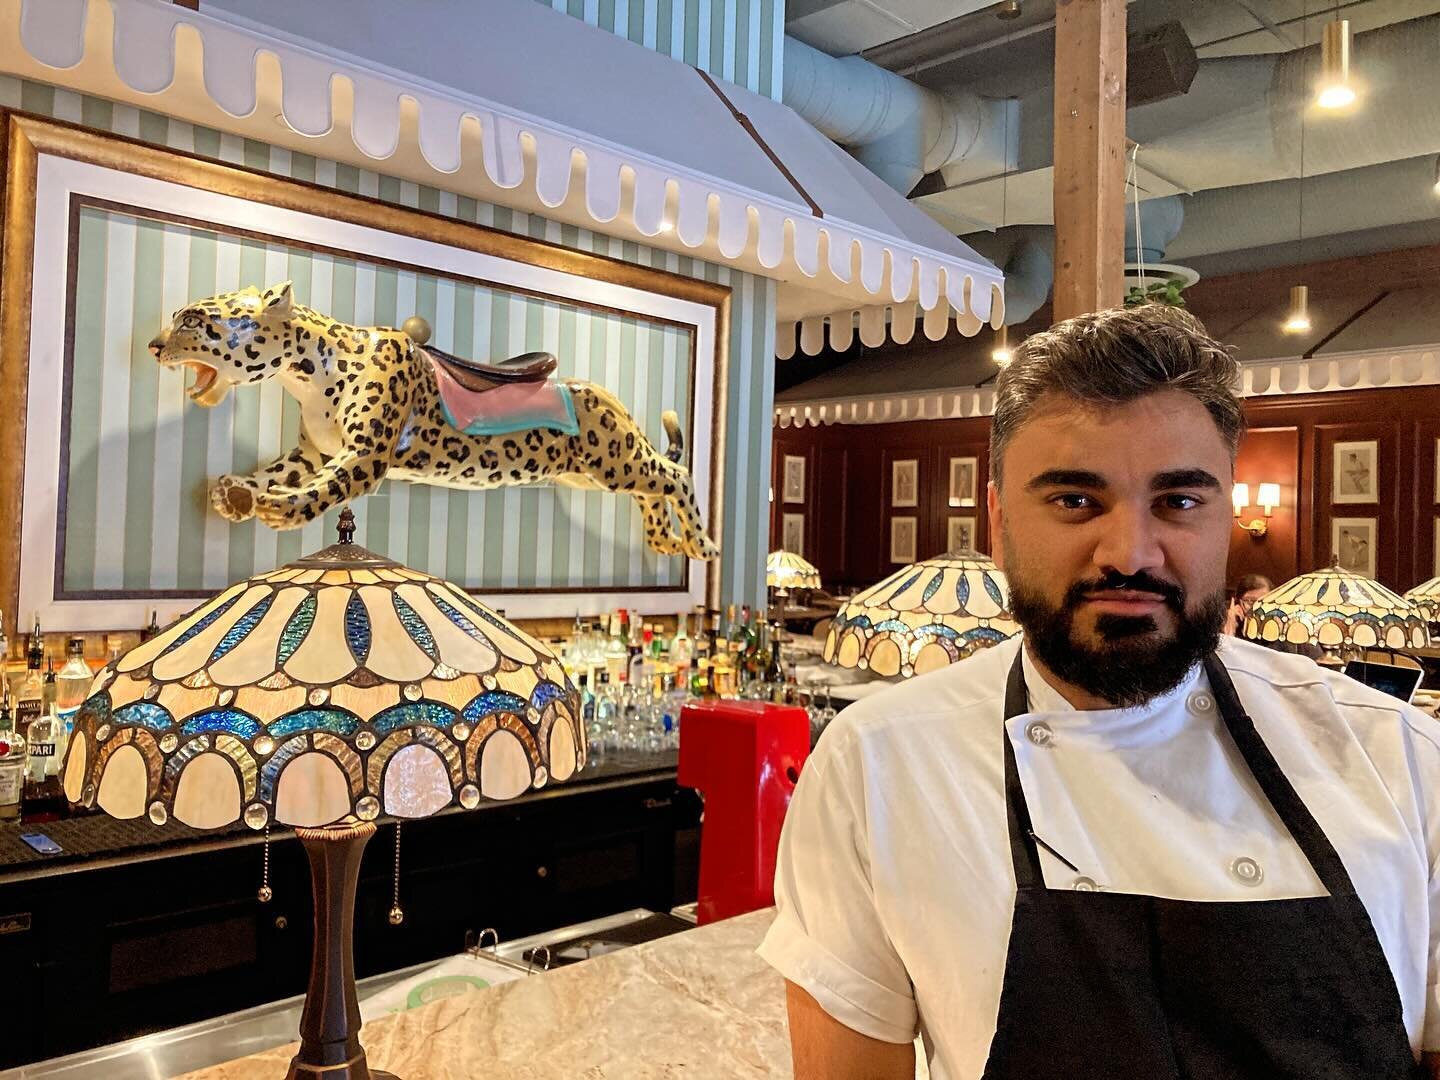 Meet chef Amit of the Calcutta Cricket Club. I popped in for lunch today to check out their new location. I was so happy to see the carousel leopard perched over top the bar. The colourful decor reminds me of my glorious travels in India back in the 